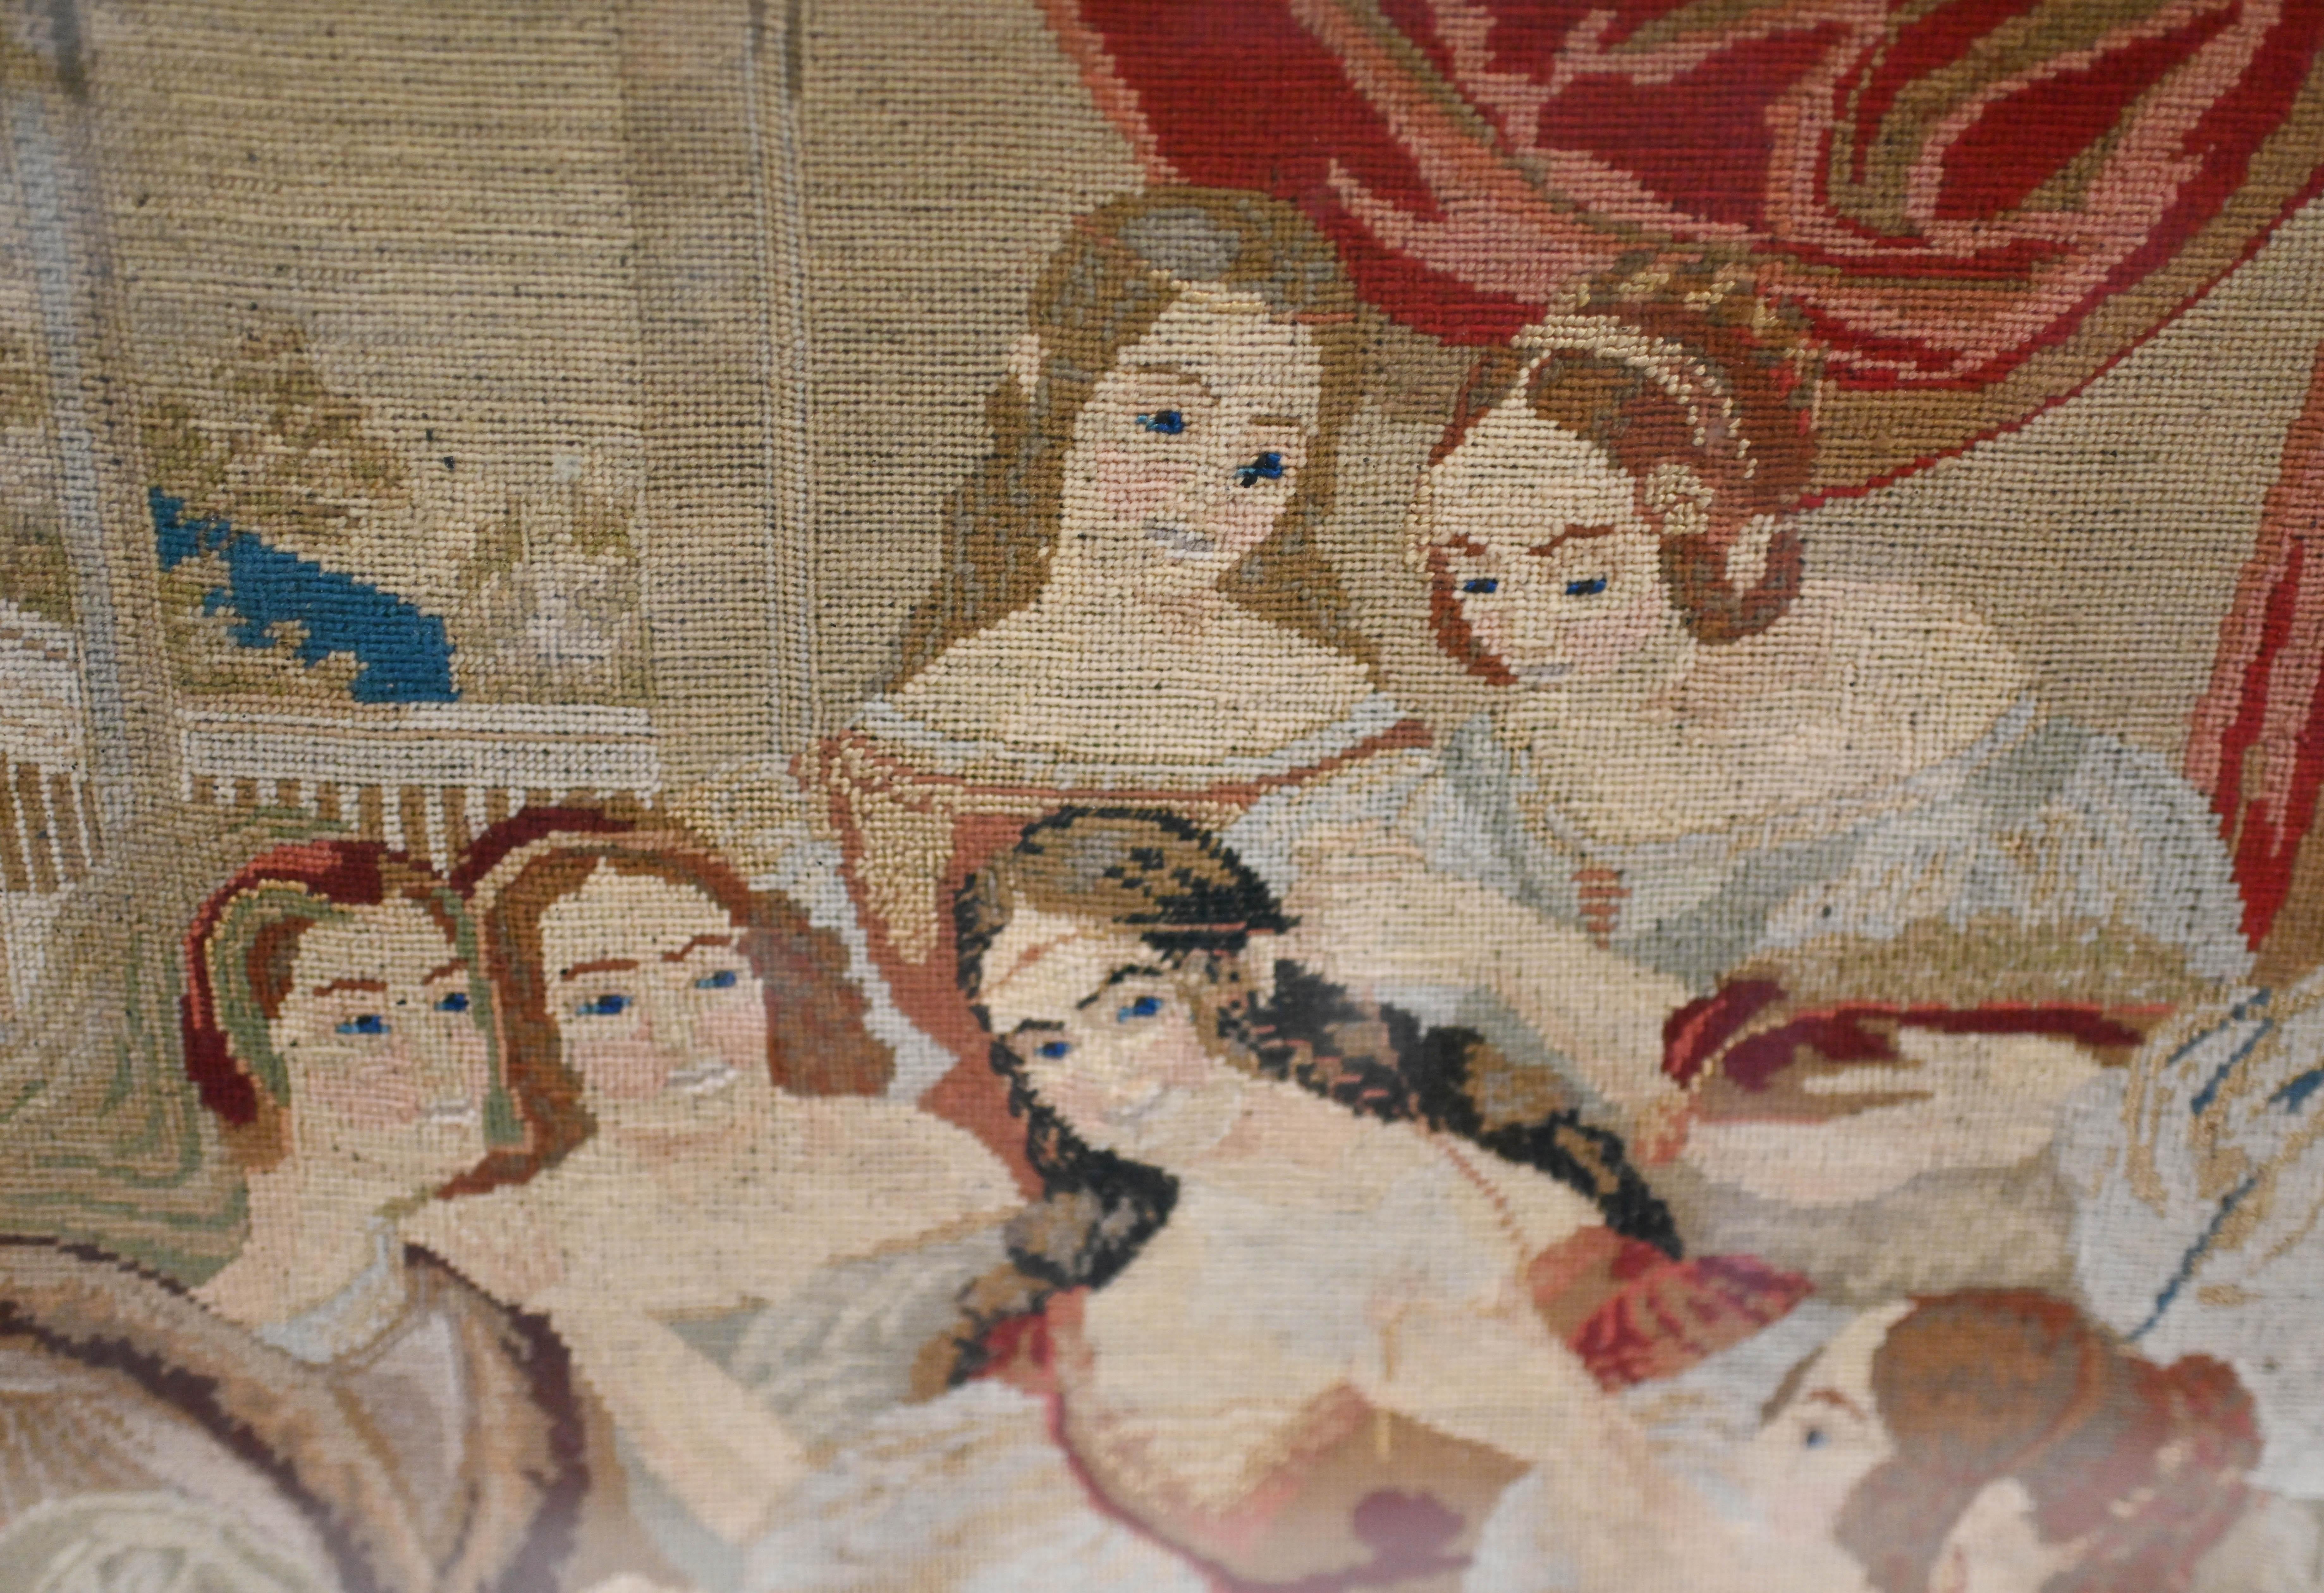 Wonderful antique Italian tapestry in a mahogany frame
Hand woven needle point  depicting young ladies in a communal social environment - looks like a courtly scene
Piece is signed Maria Bill and dated 1865
To the corners at the top are intricate